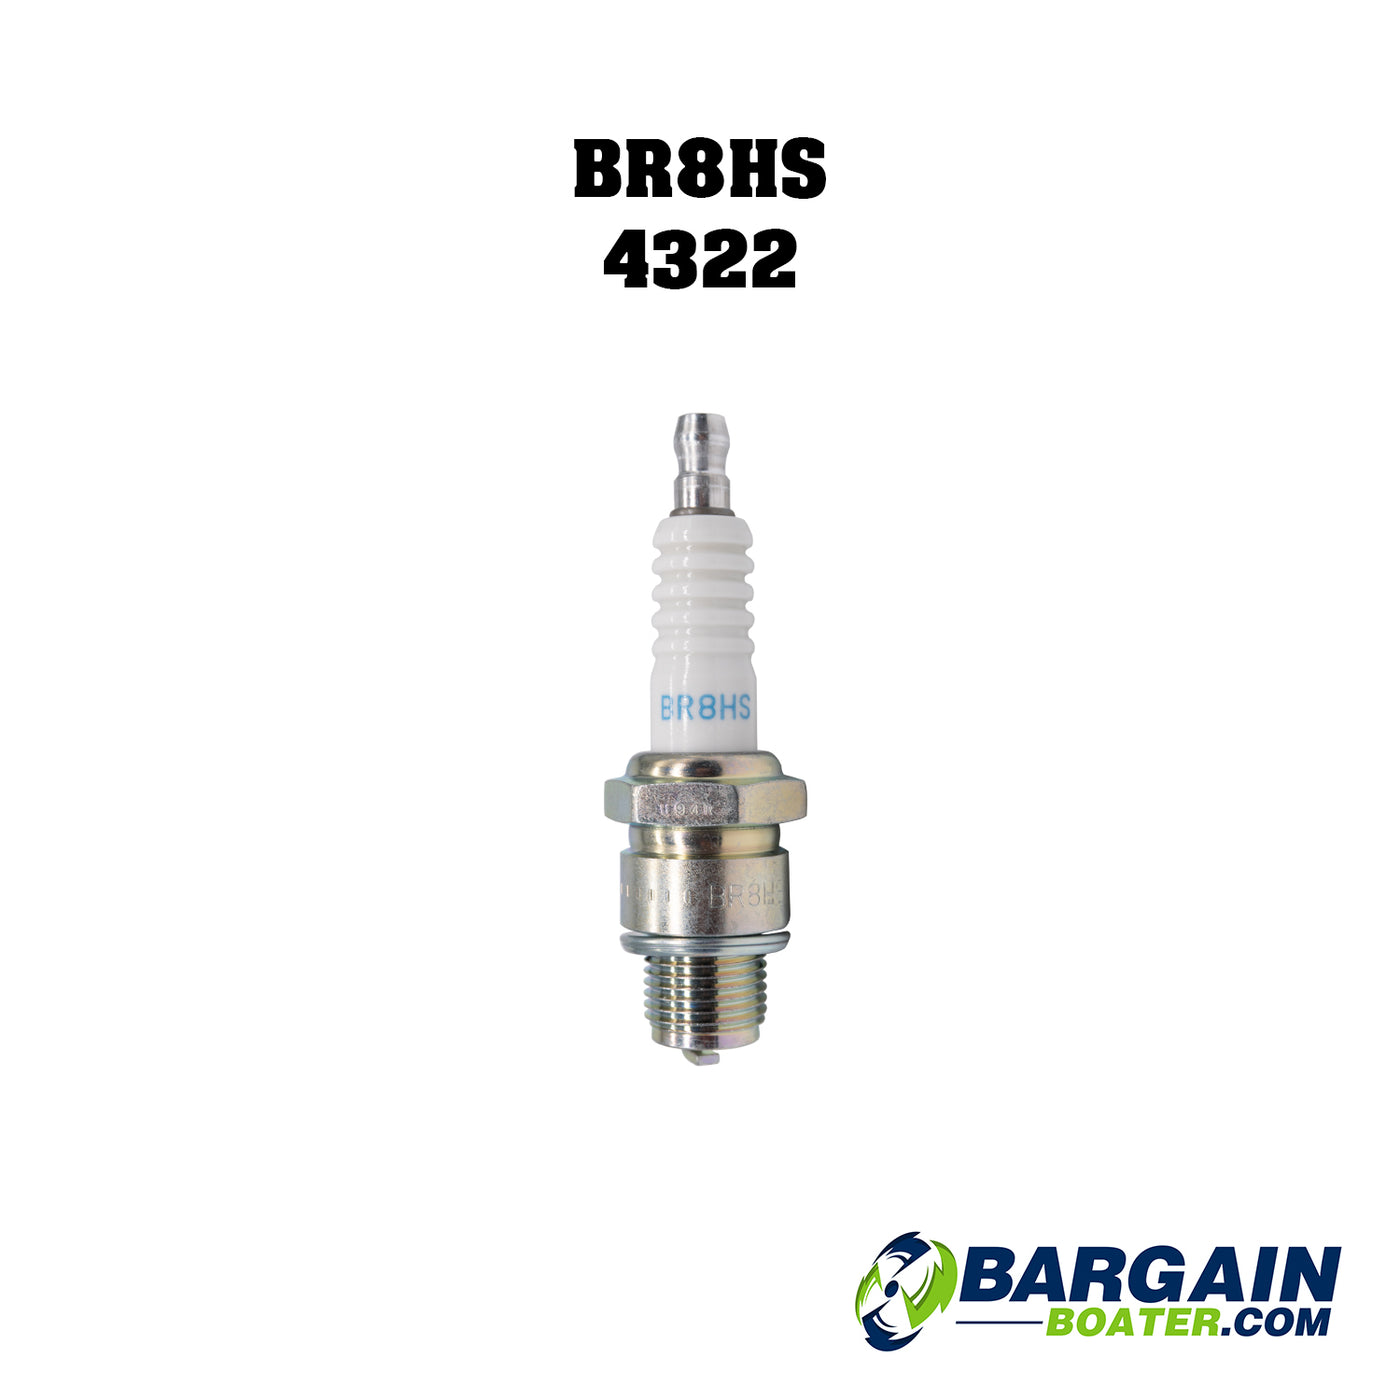 This is an NGK 1134 BR8HS-10 Spark Plug for Yamaha 4-Stroke outboard motors (BR8-HS100-00-00).